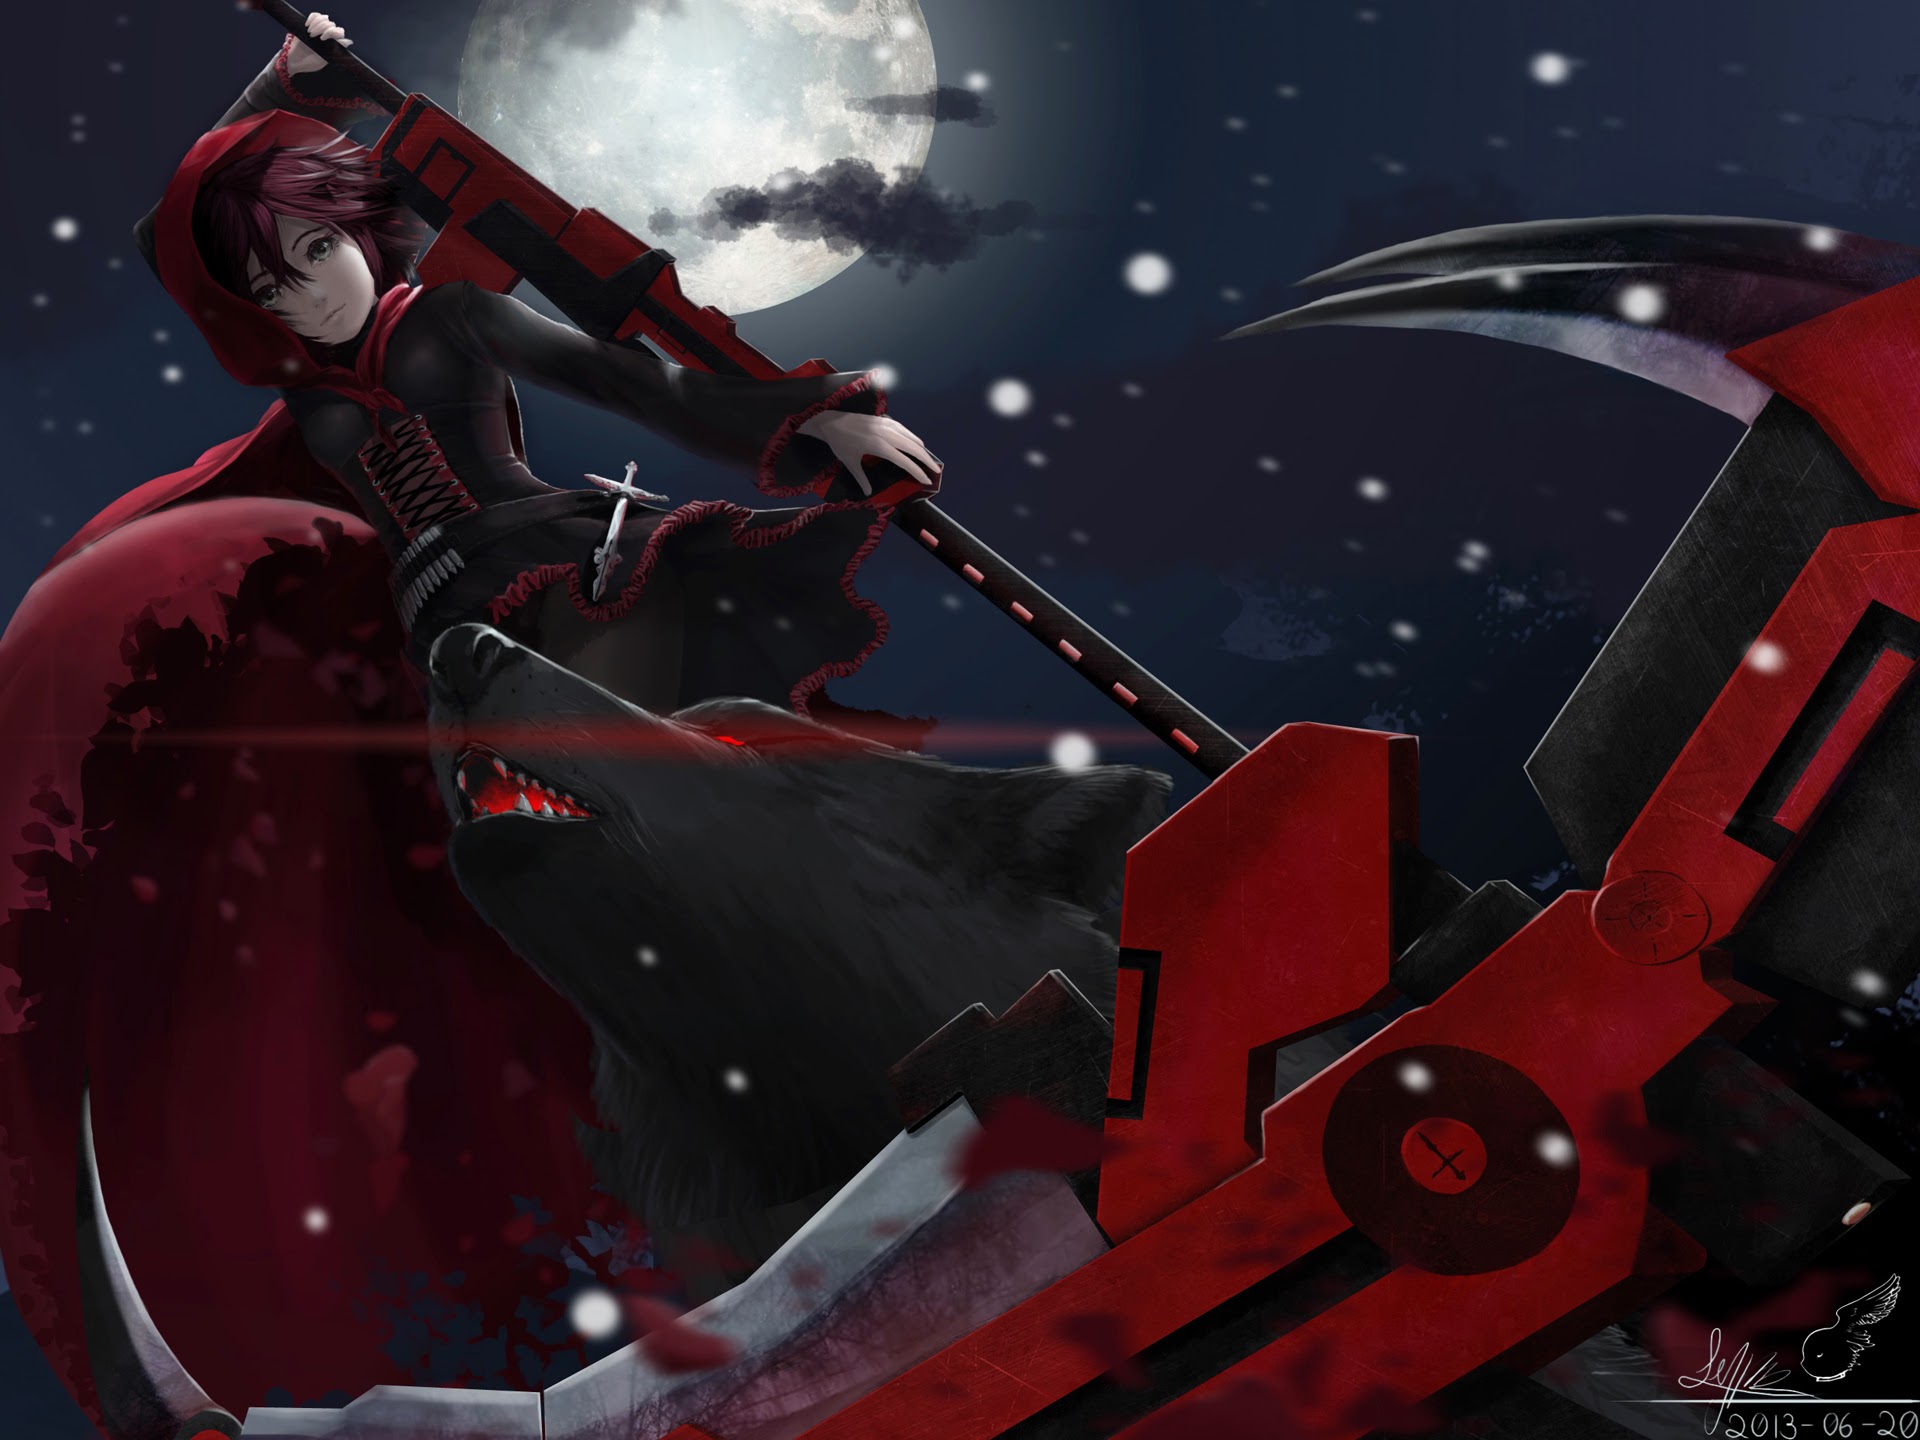 Free Download Rwby Wallpaper Ruby Rose Rwby Death Scythe 19x1440 For Your Desktop Mobile Tablet Explore 47 Rwby Ruby Rose Wallpaper Rwby Wallpaper Download Rwby Blake Wallpaper Rwby Desktop Wallpaper